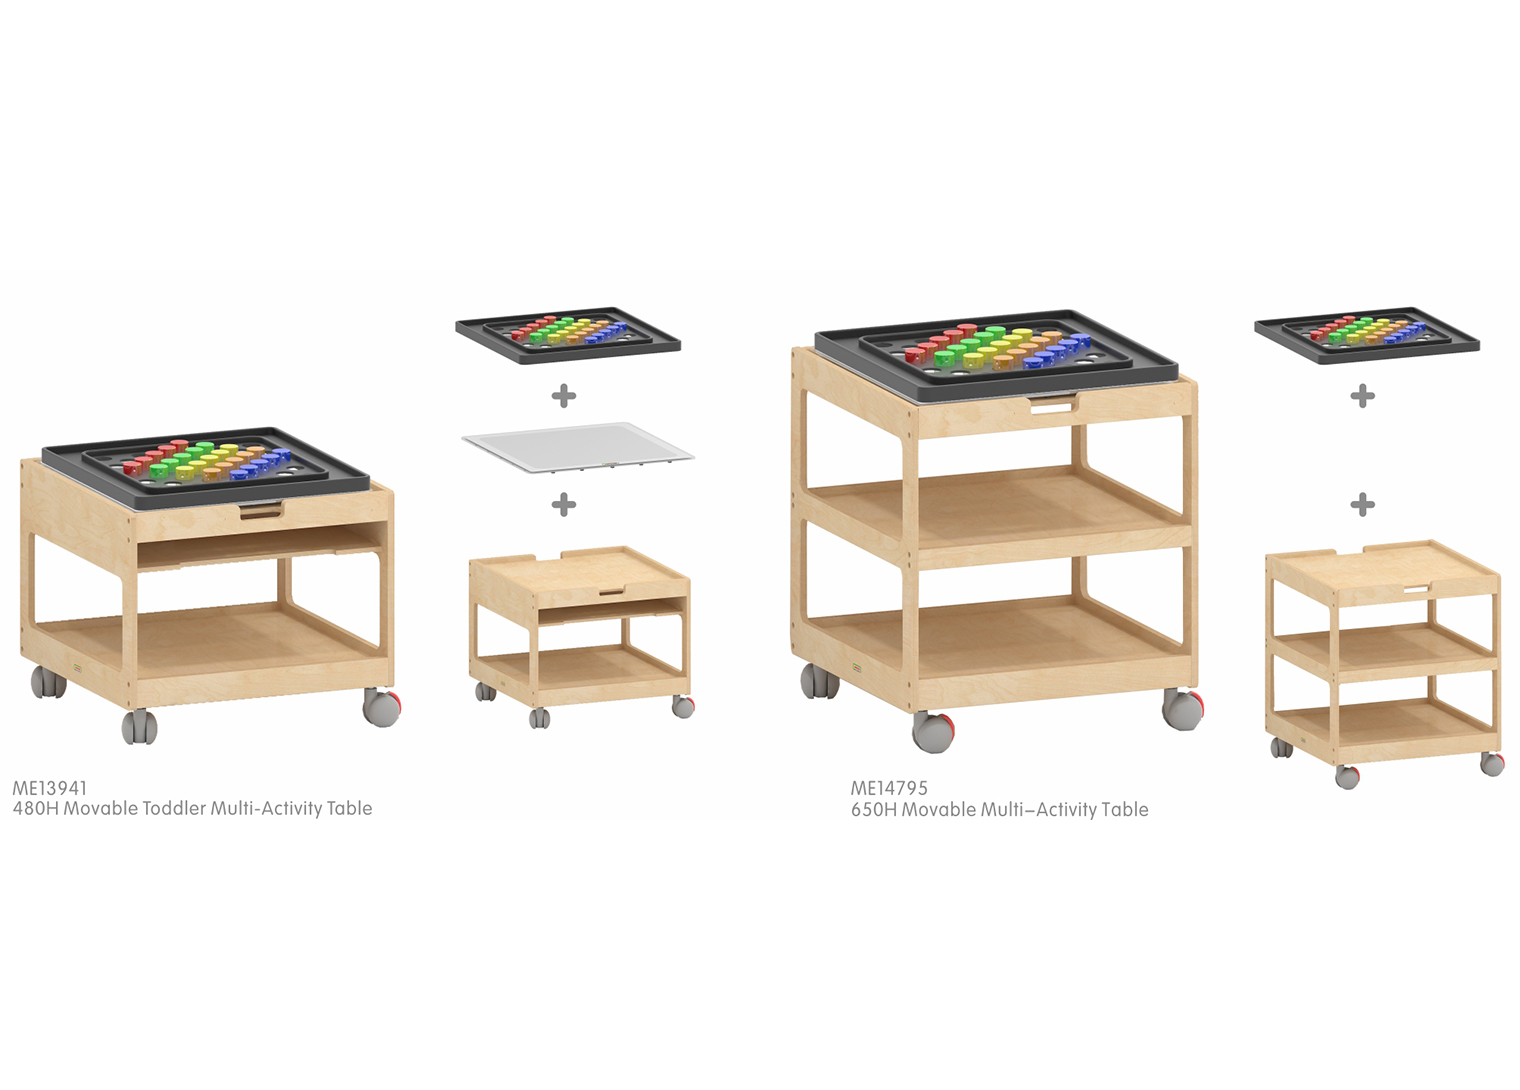 650H Movable Multi-Activity Table 